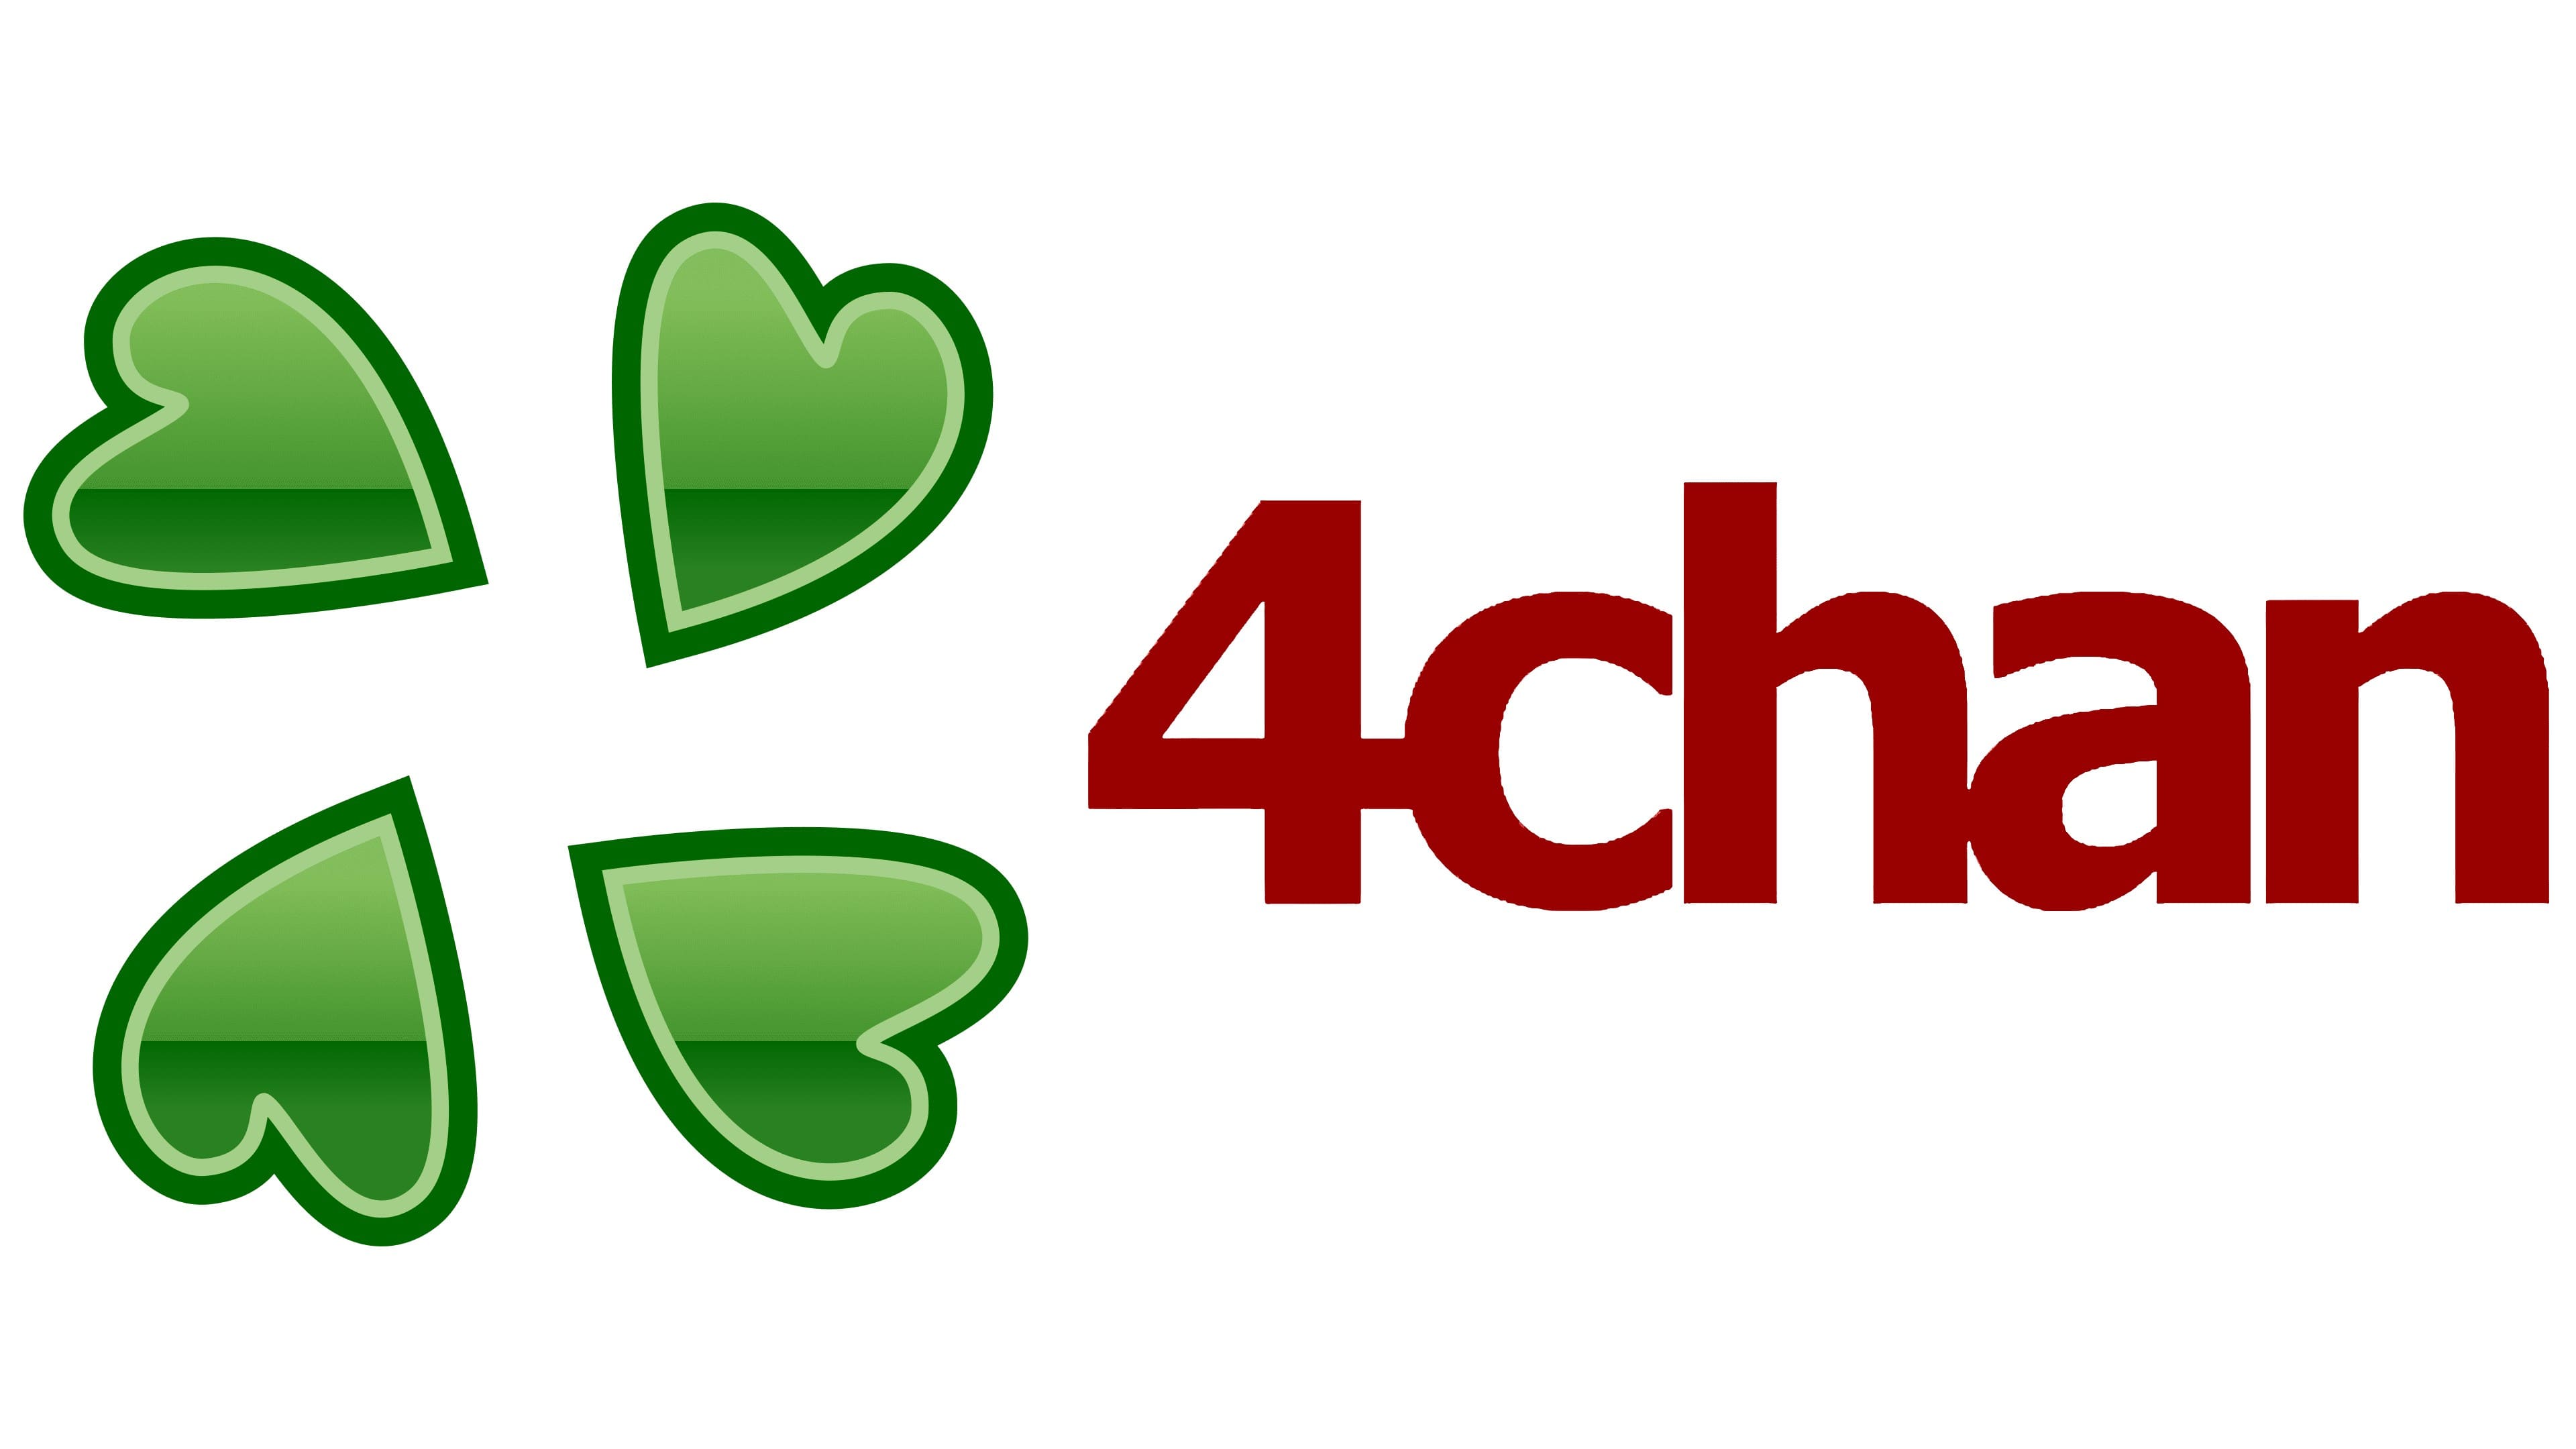 To be able to fully understand the logo of 4chan, we need to keep in mind t...